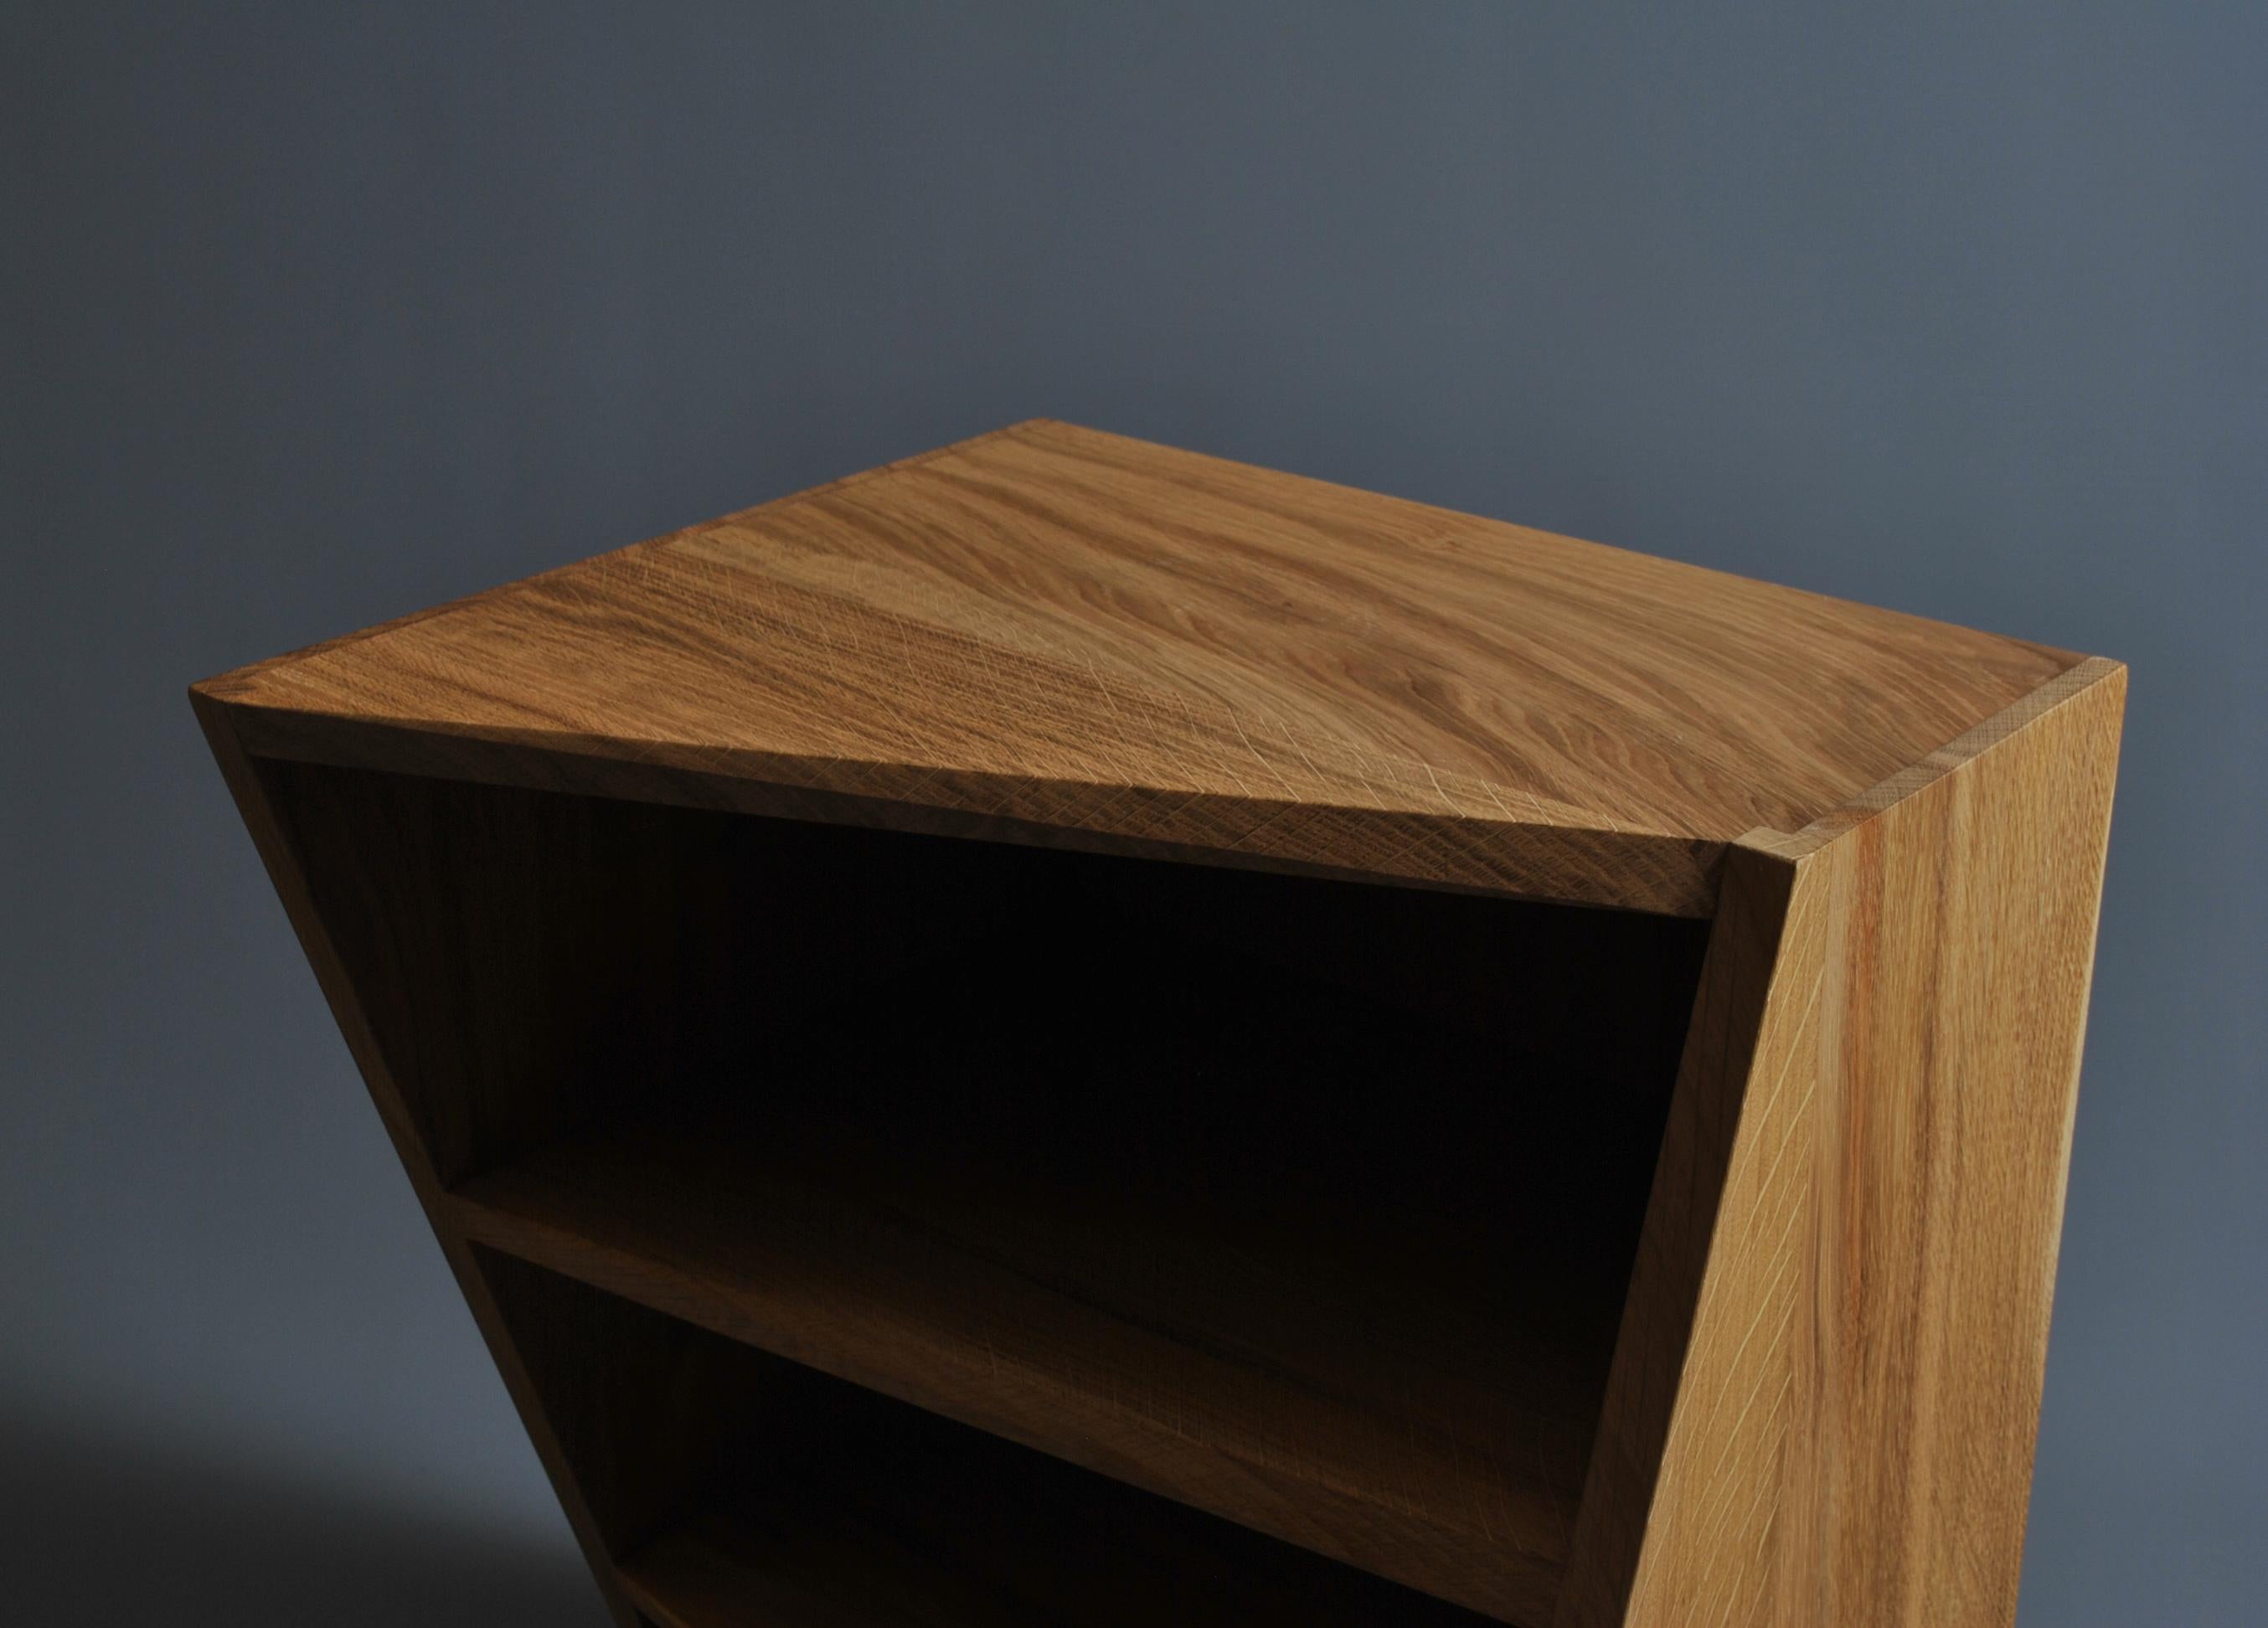 Hand-Crafted Handcrafted Postmodern Shelf Unit For Sale